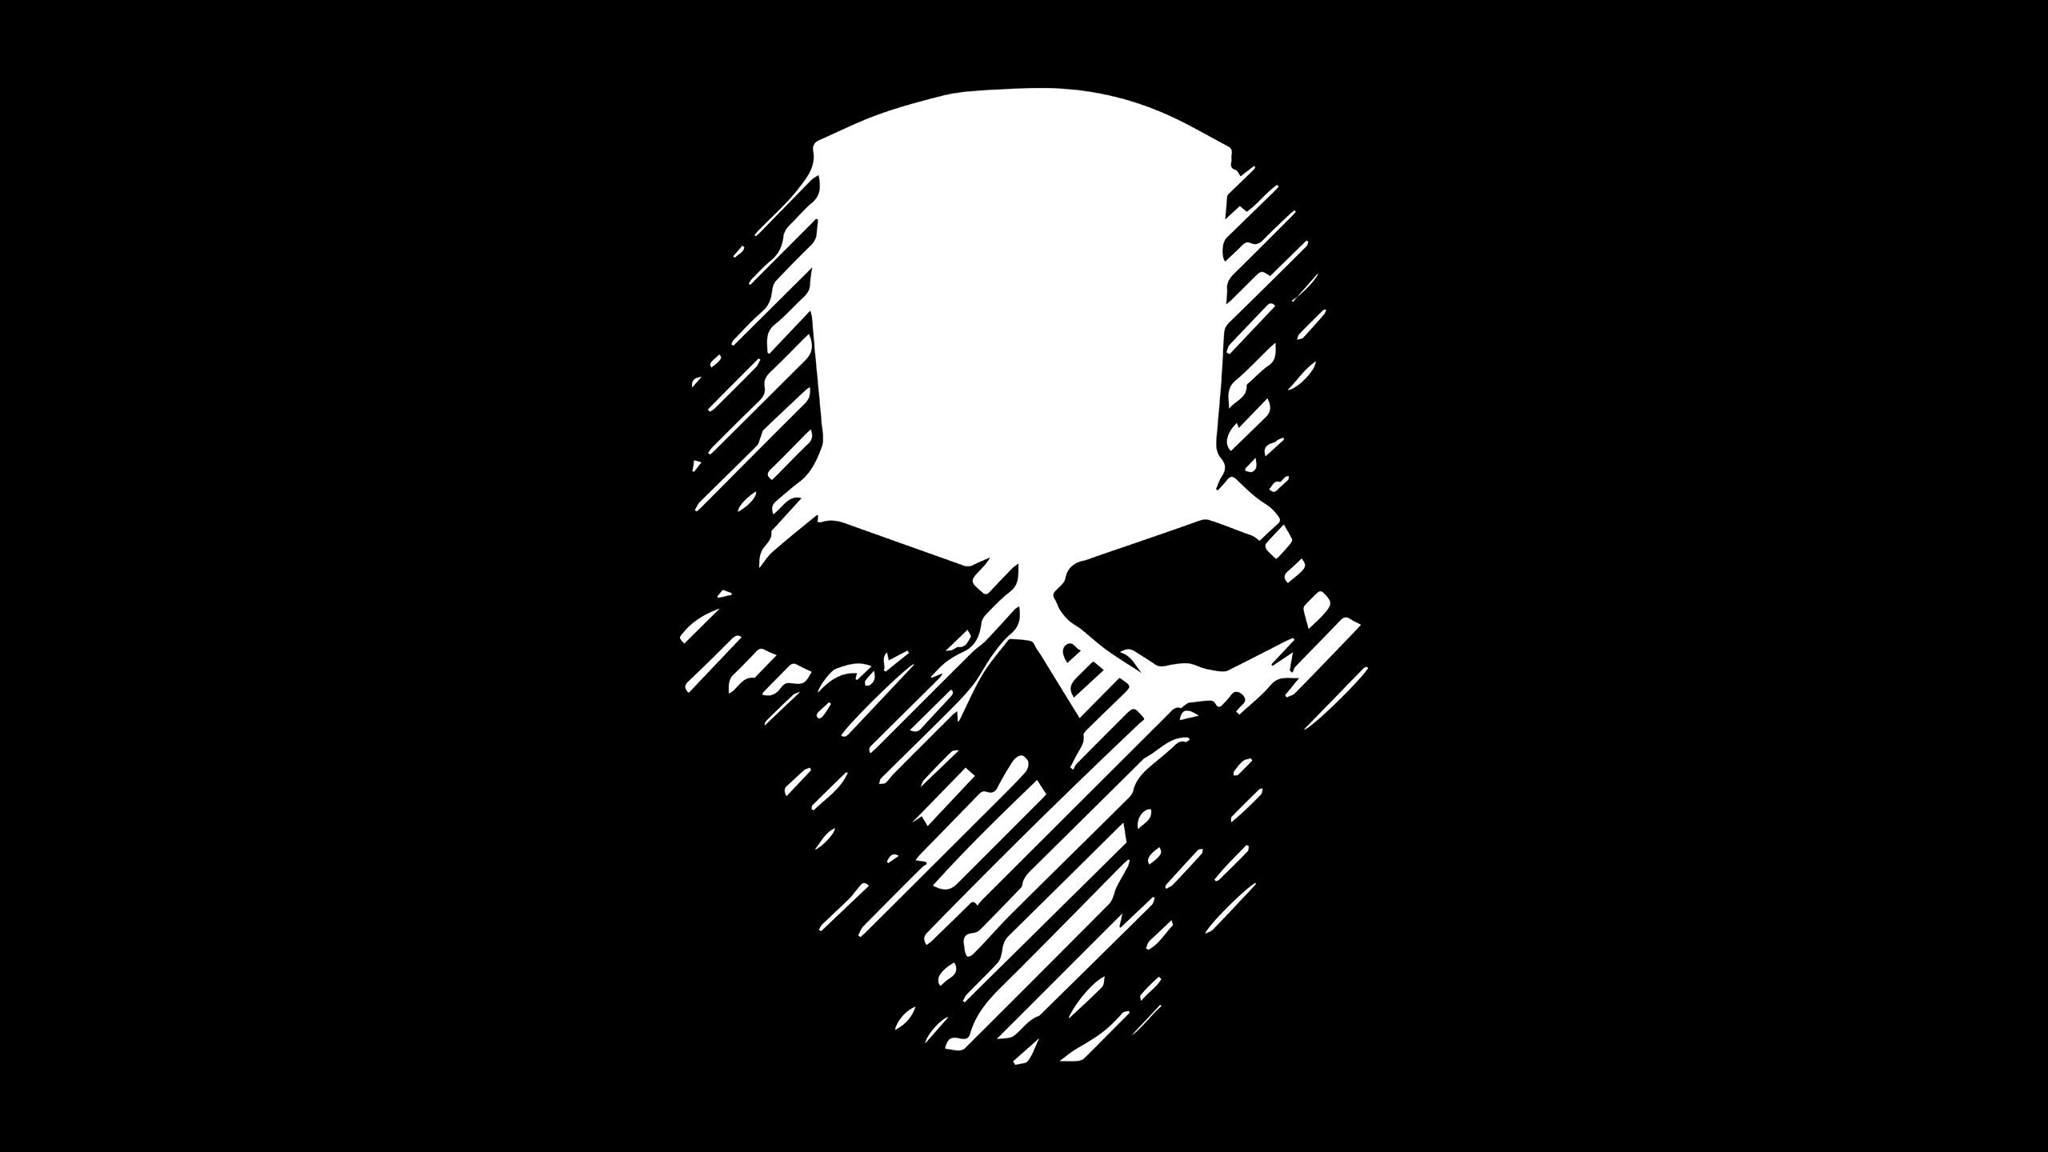 General 2048x1152 Tom Clancy's Ghost Recon military minimalism simple background skull black background Ubisoft